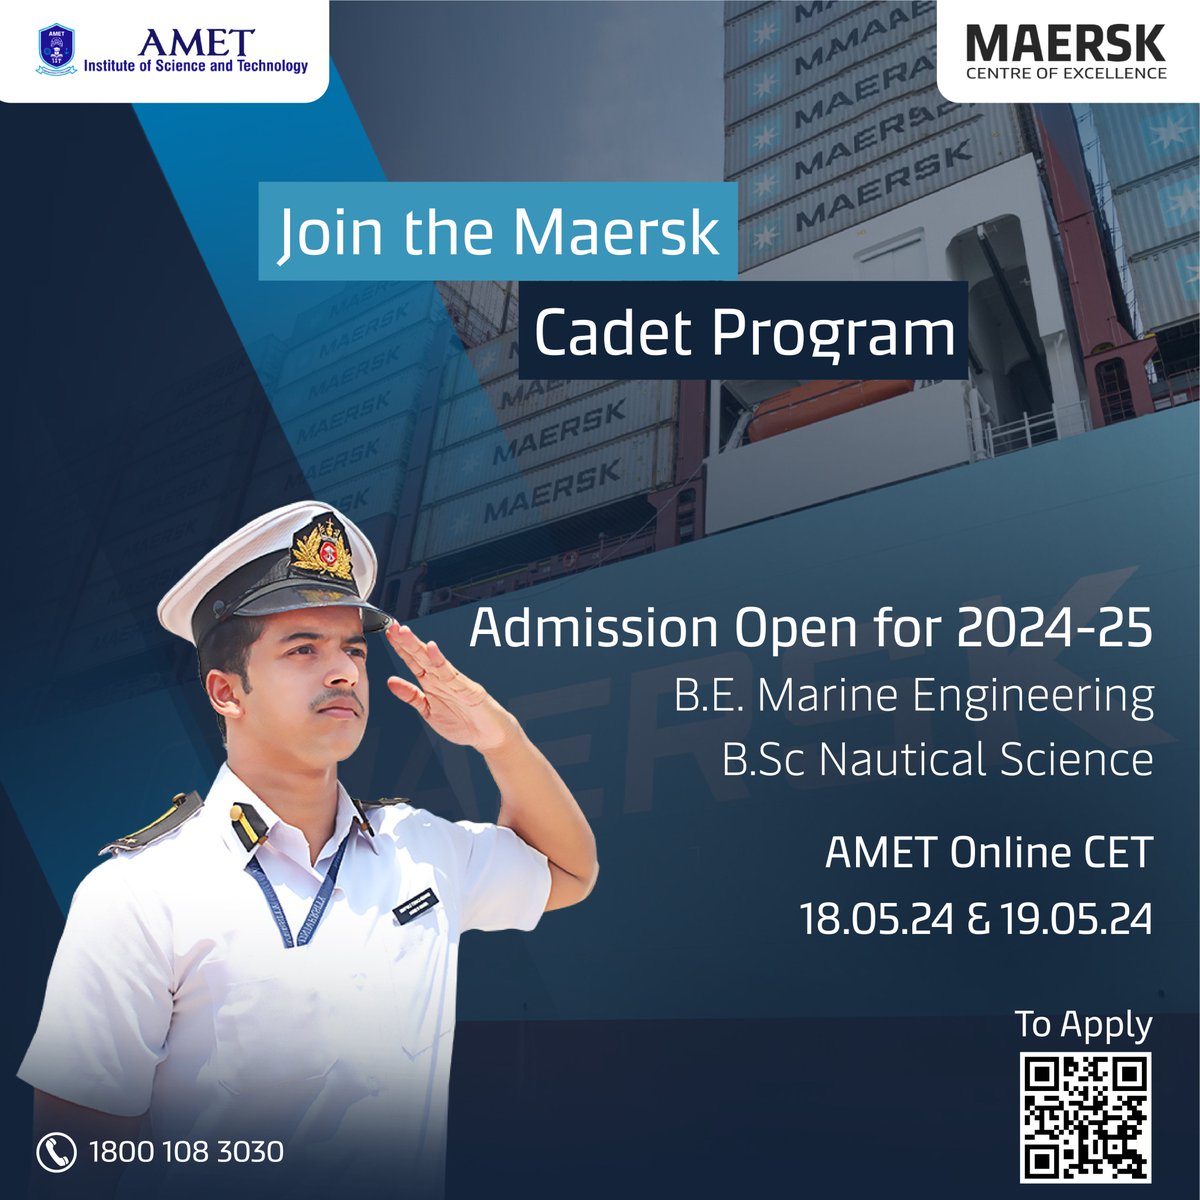 Enquire about Maersk's Cadetship Program and Begin your Journey to a Promising Future in the Merchant Navy!

#maerskCadetship #nauticalscience  #maritimeEducation #futureleaders #AMET #AMETIST #AMETMCE #MAERSK

Link To Apply: amet-ist.in/amet-mce/